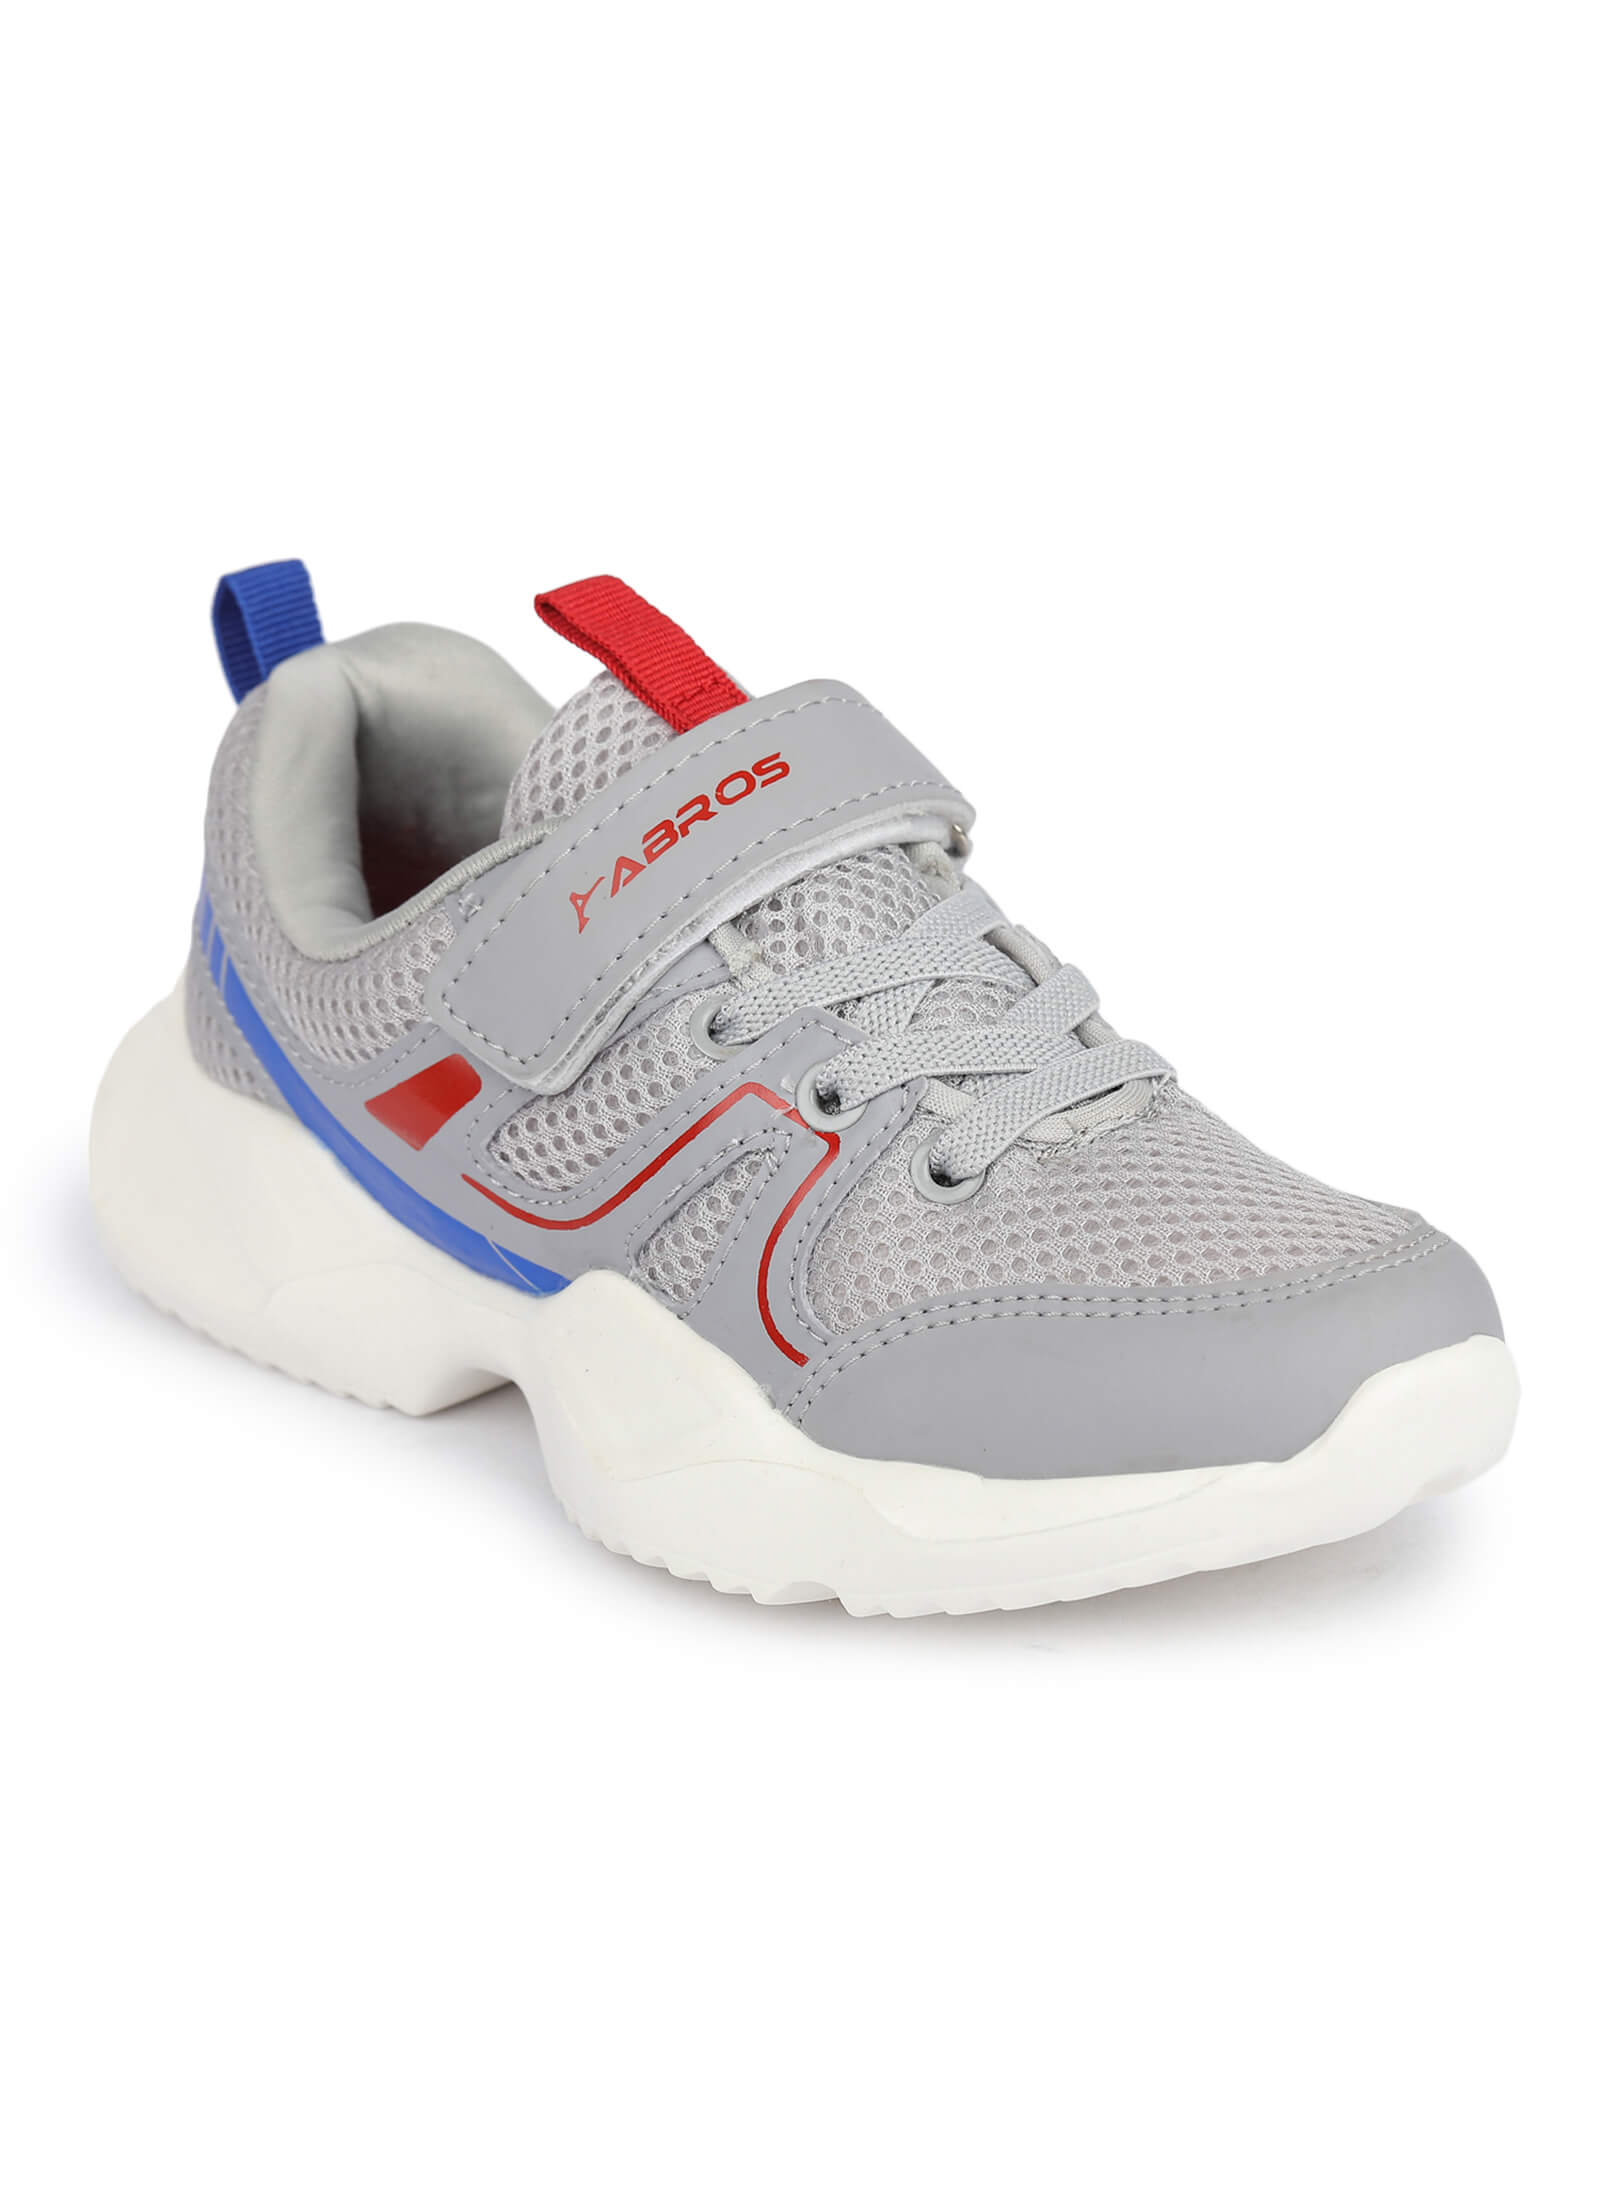 Fighter-N Sports Shoes for Kids